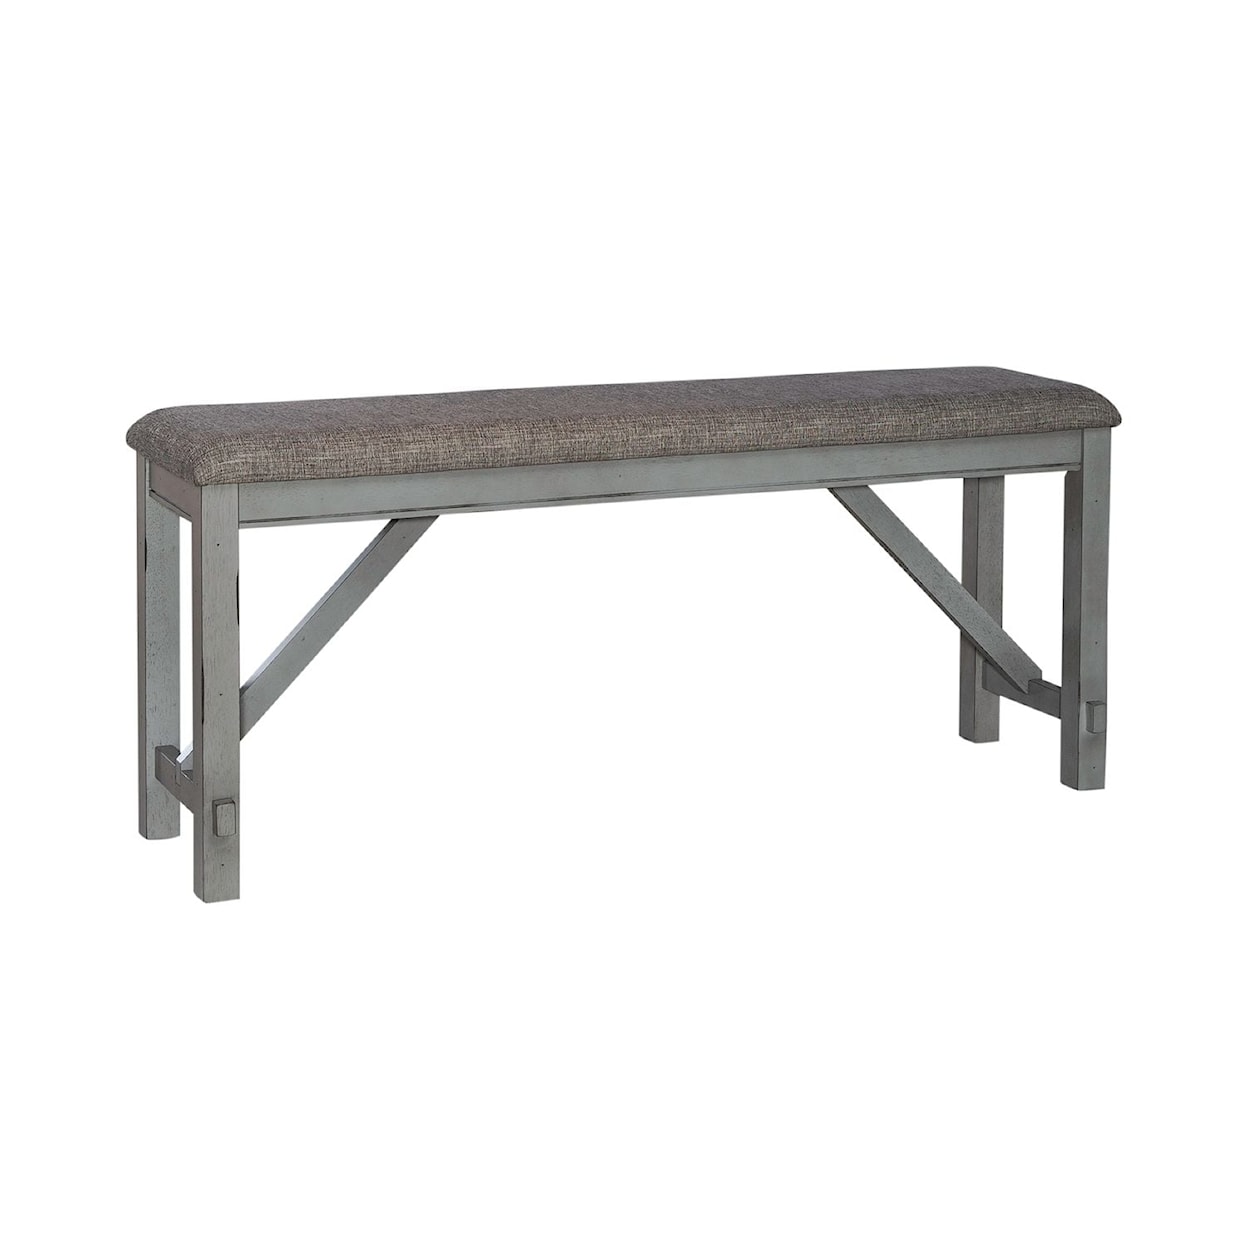 Libby Newport Counter Height Dining Bench